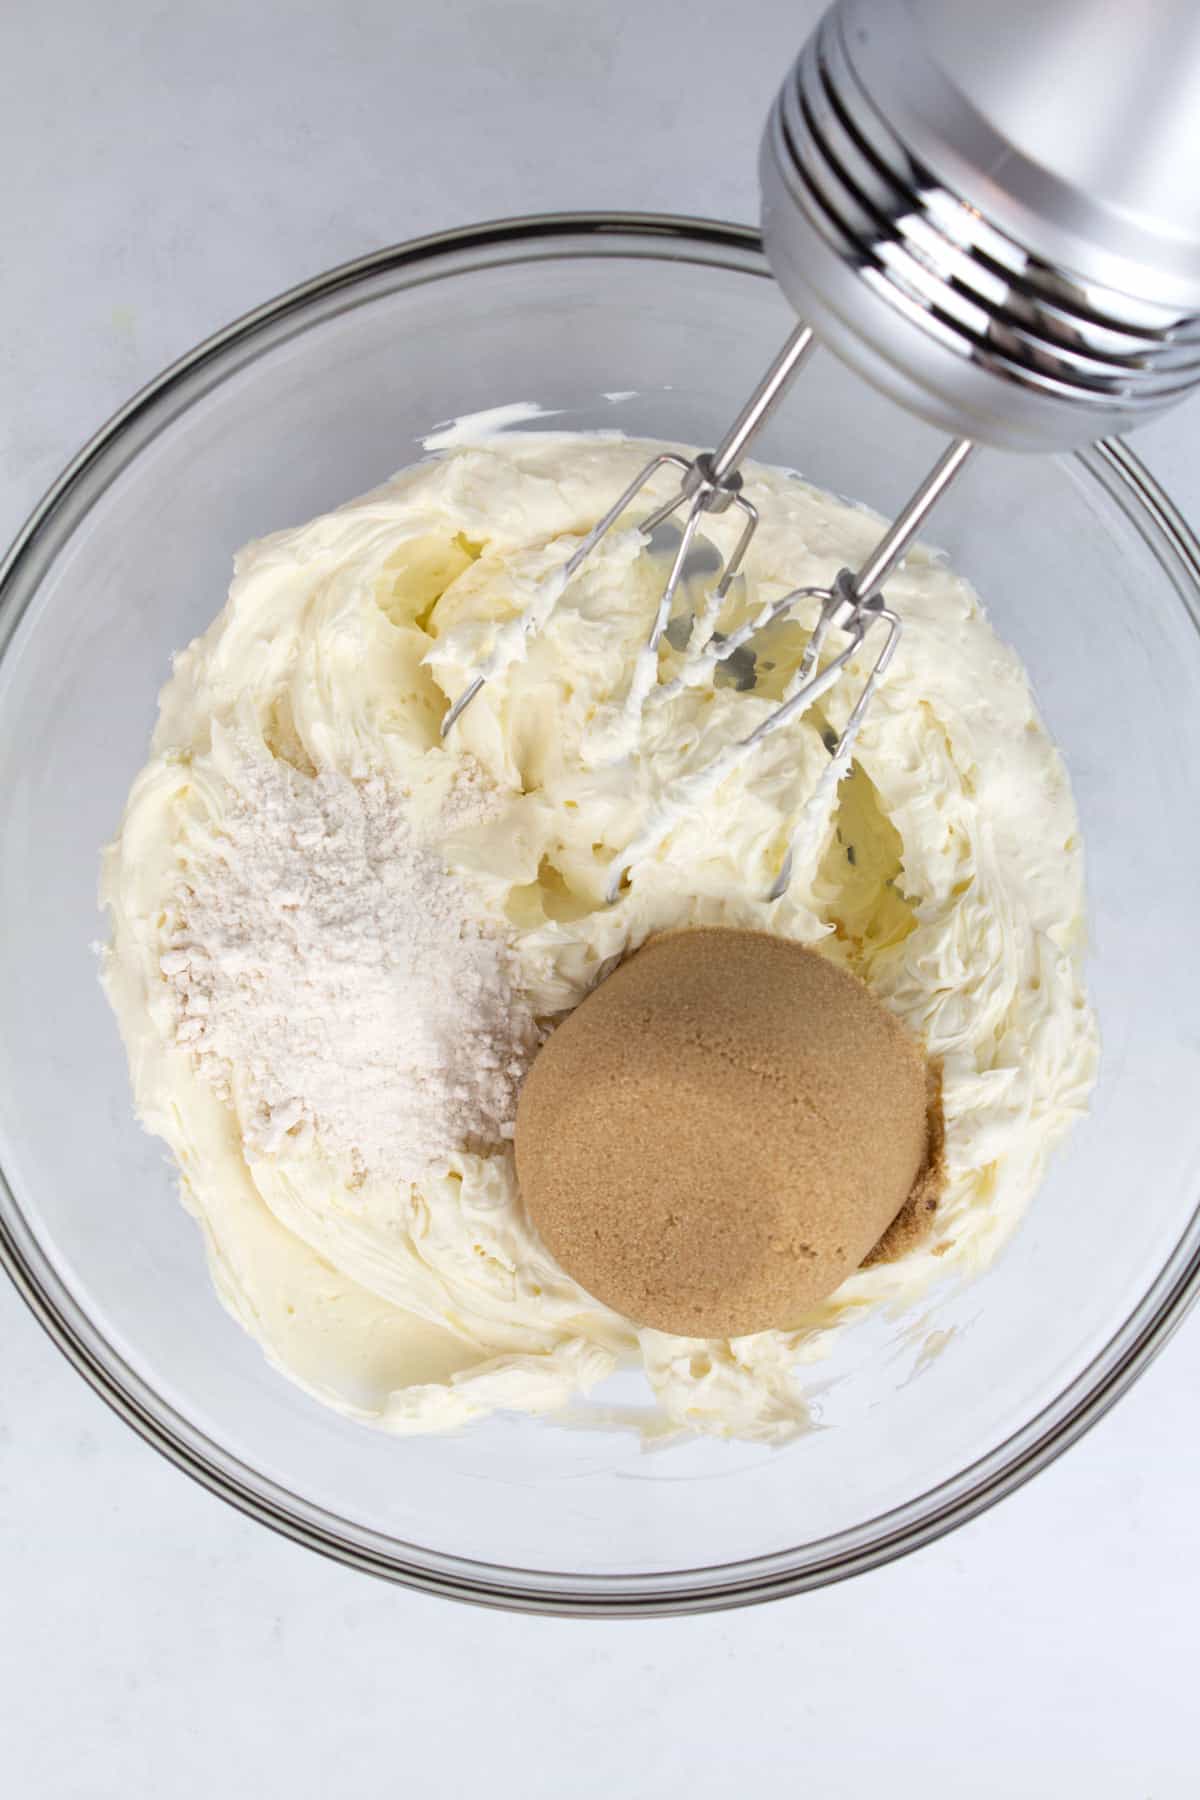 An overhead view of cream cheese, sugar, and flour in a clear glass bowl with a hand mixer.